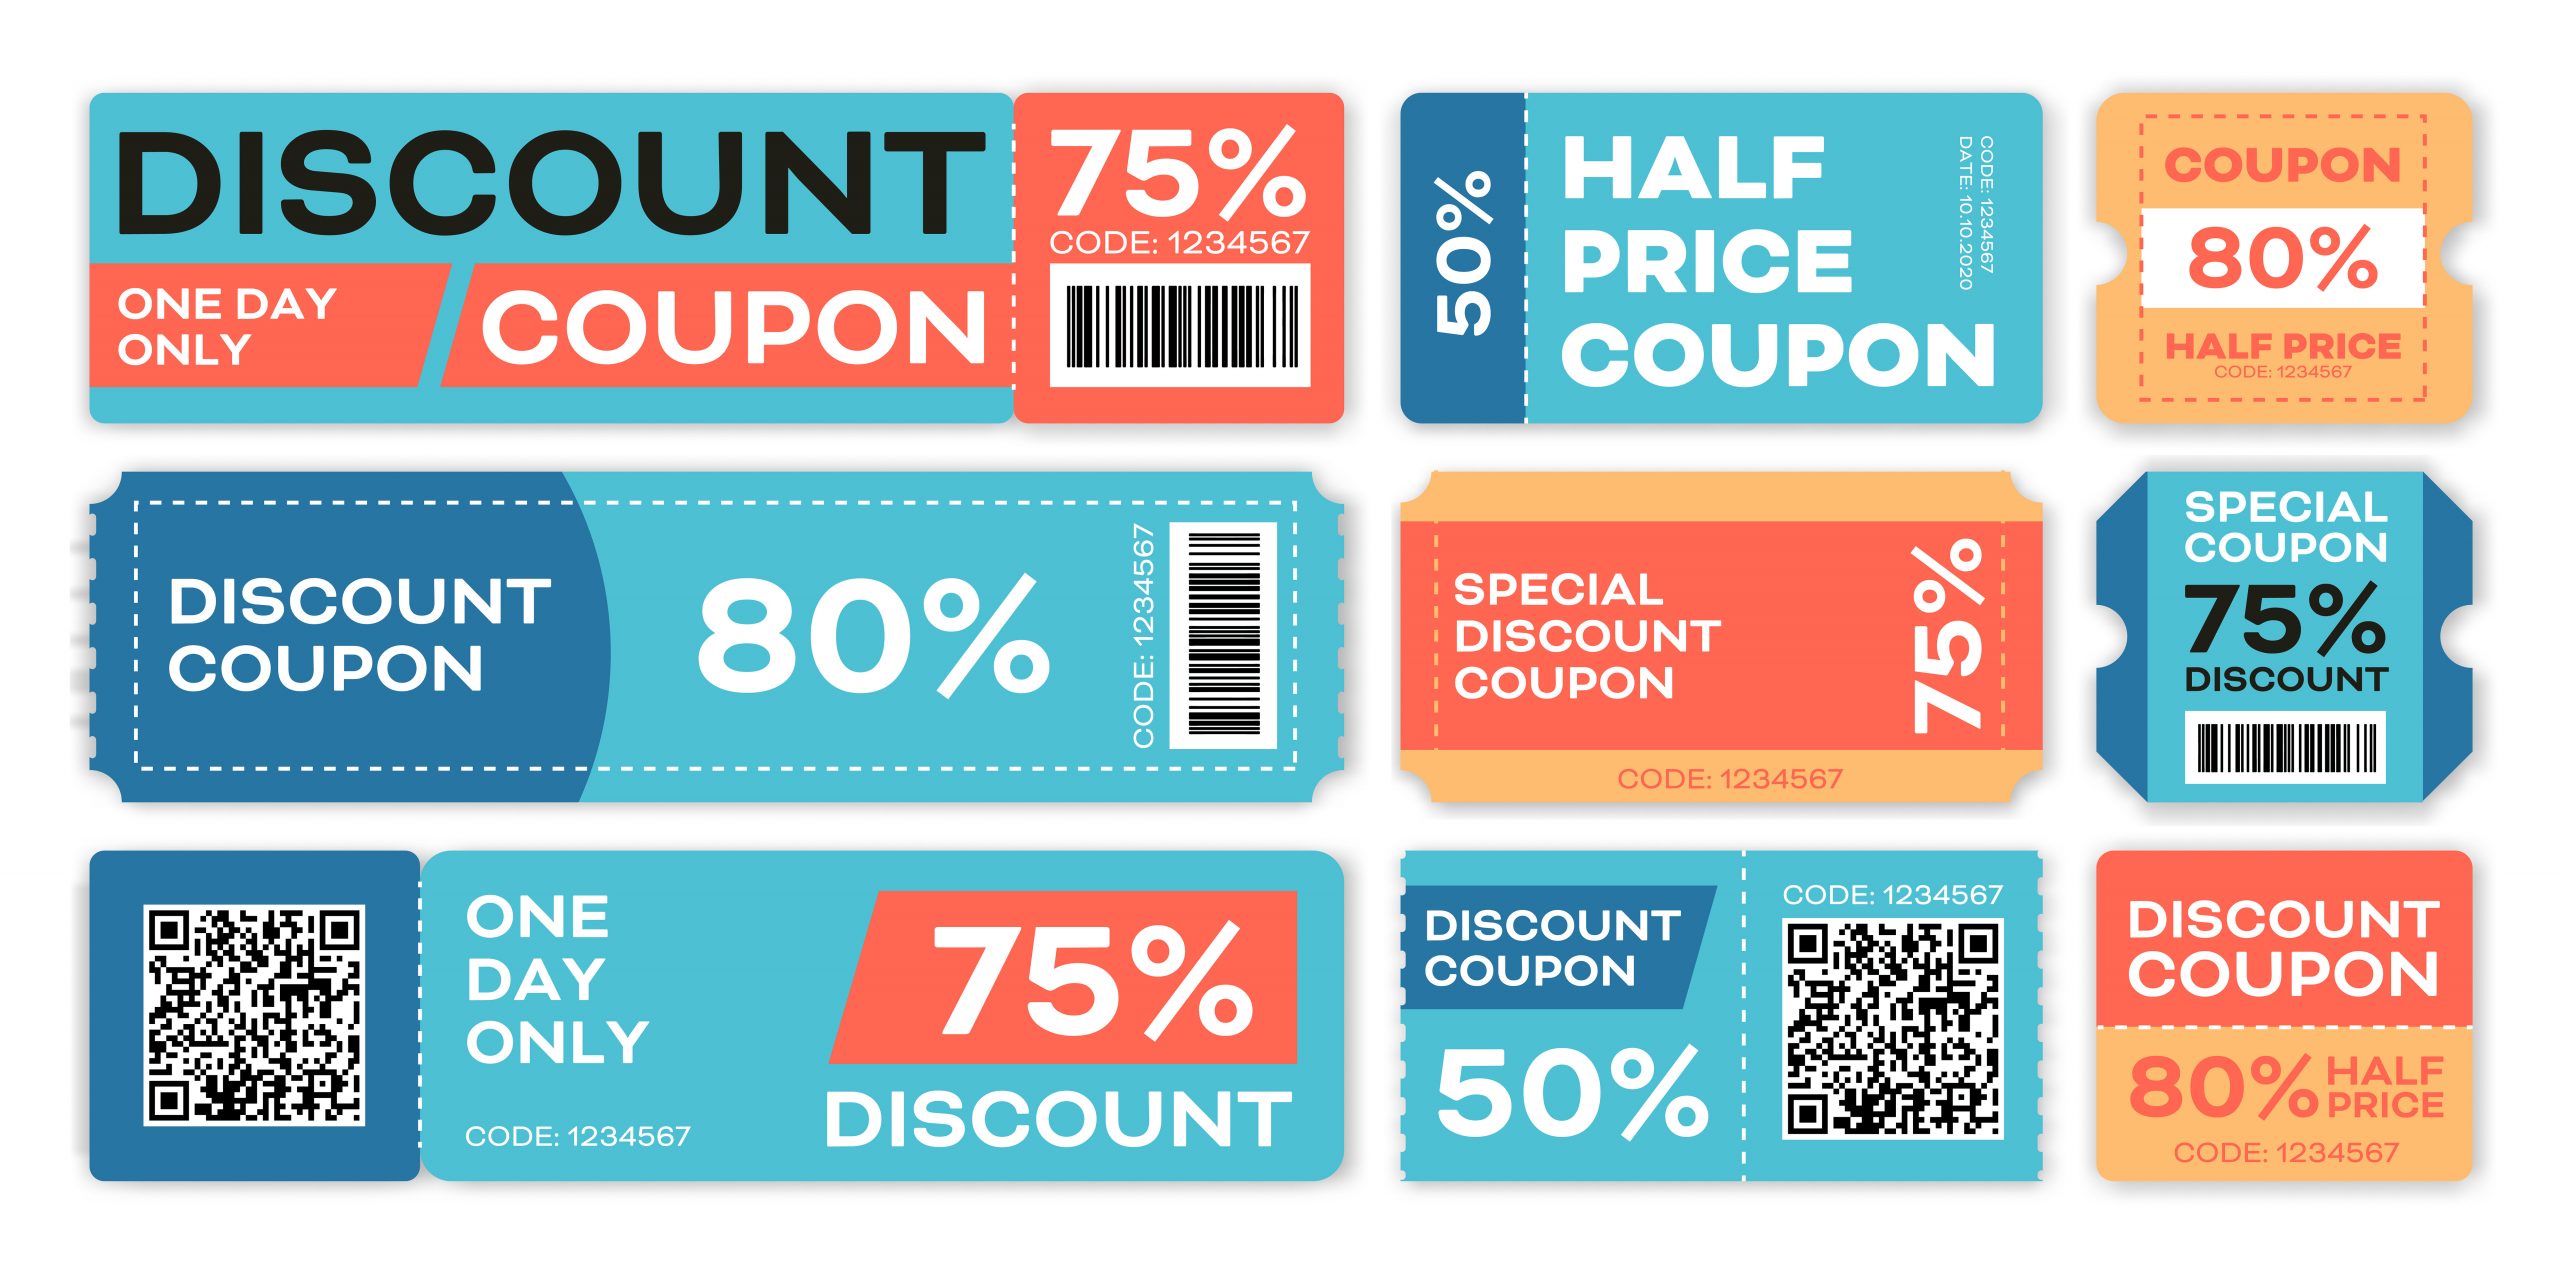 Use coupons and enjoy 8 benefits